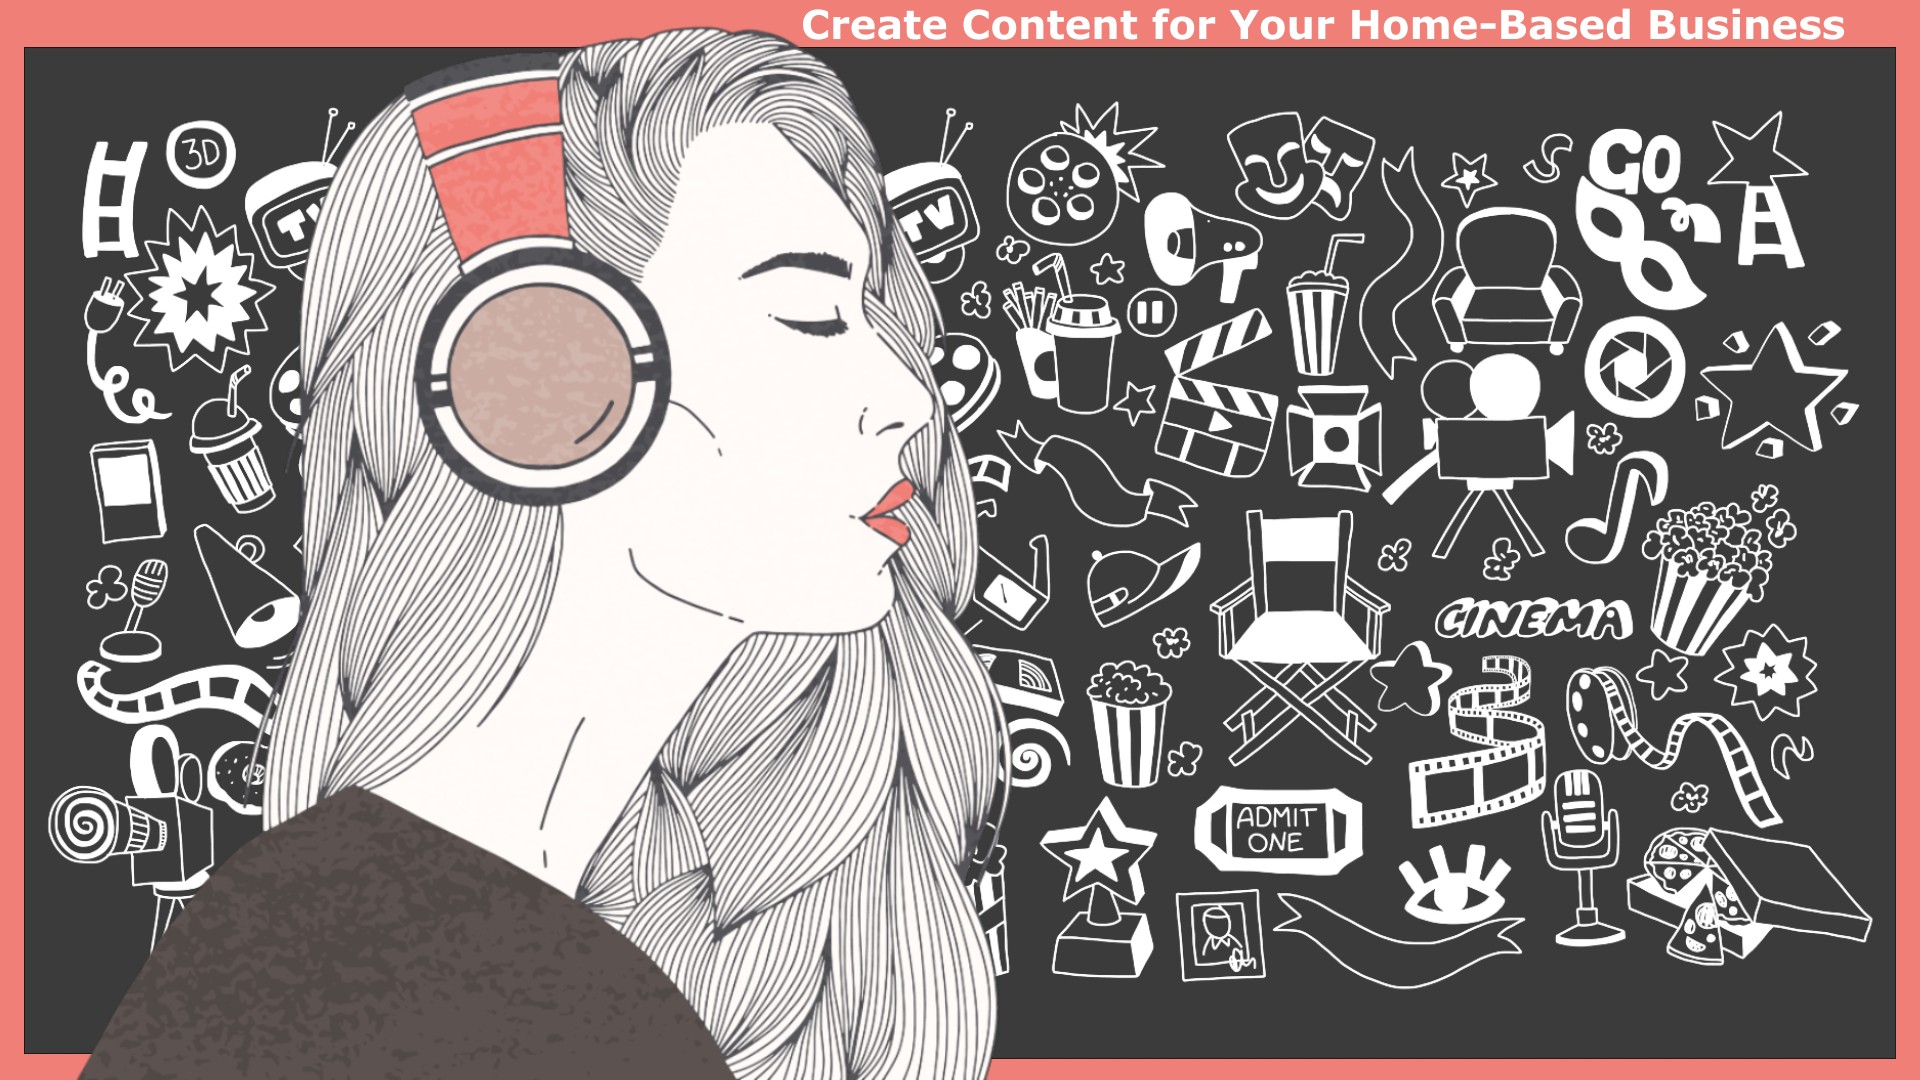 Create Content for Your Home-Based Business